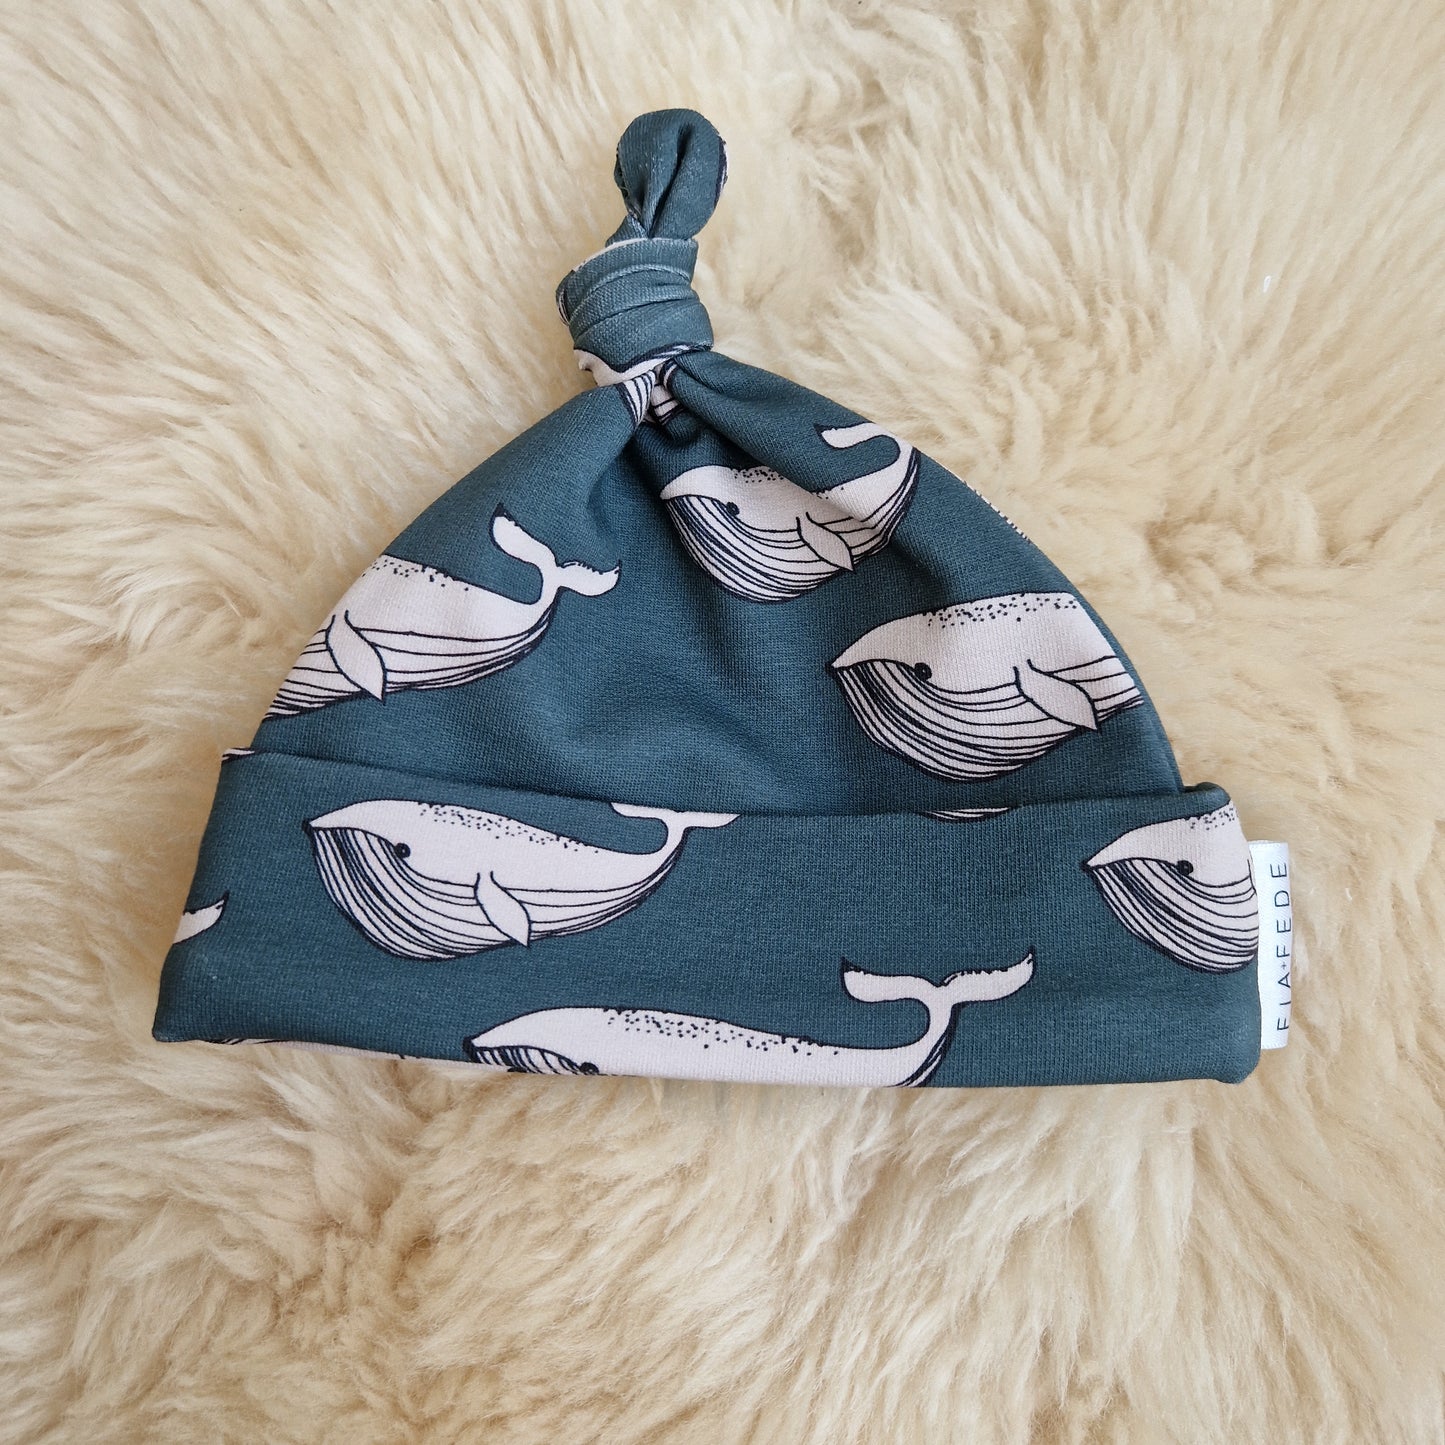 WHALES - Organic baby hat